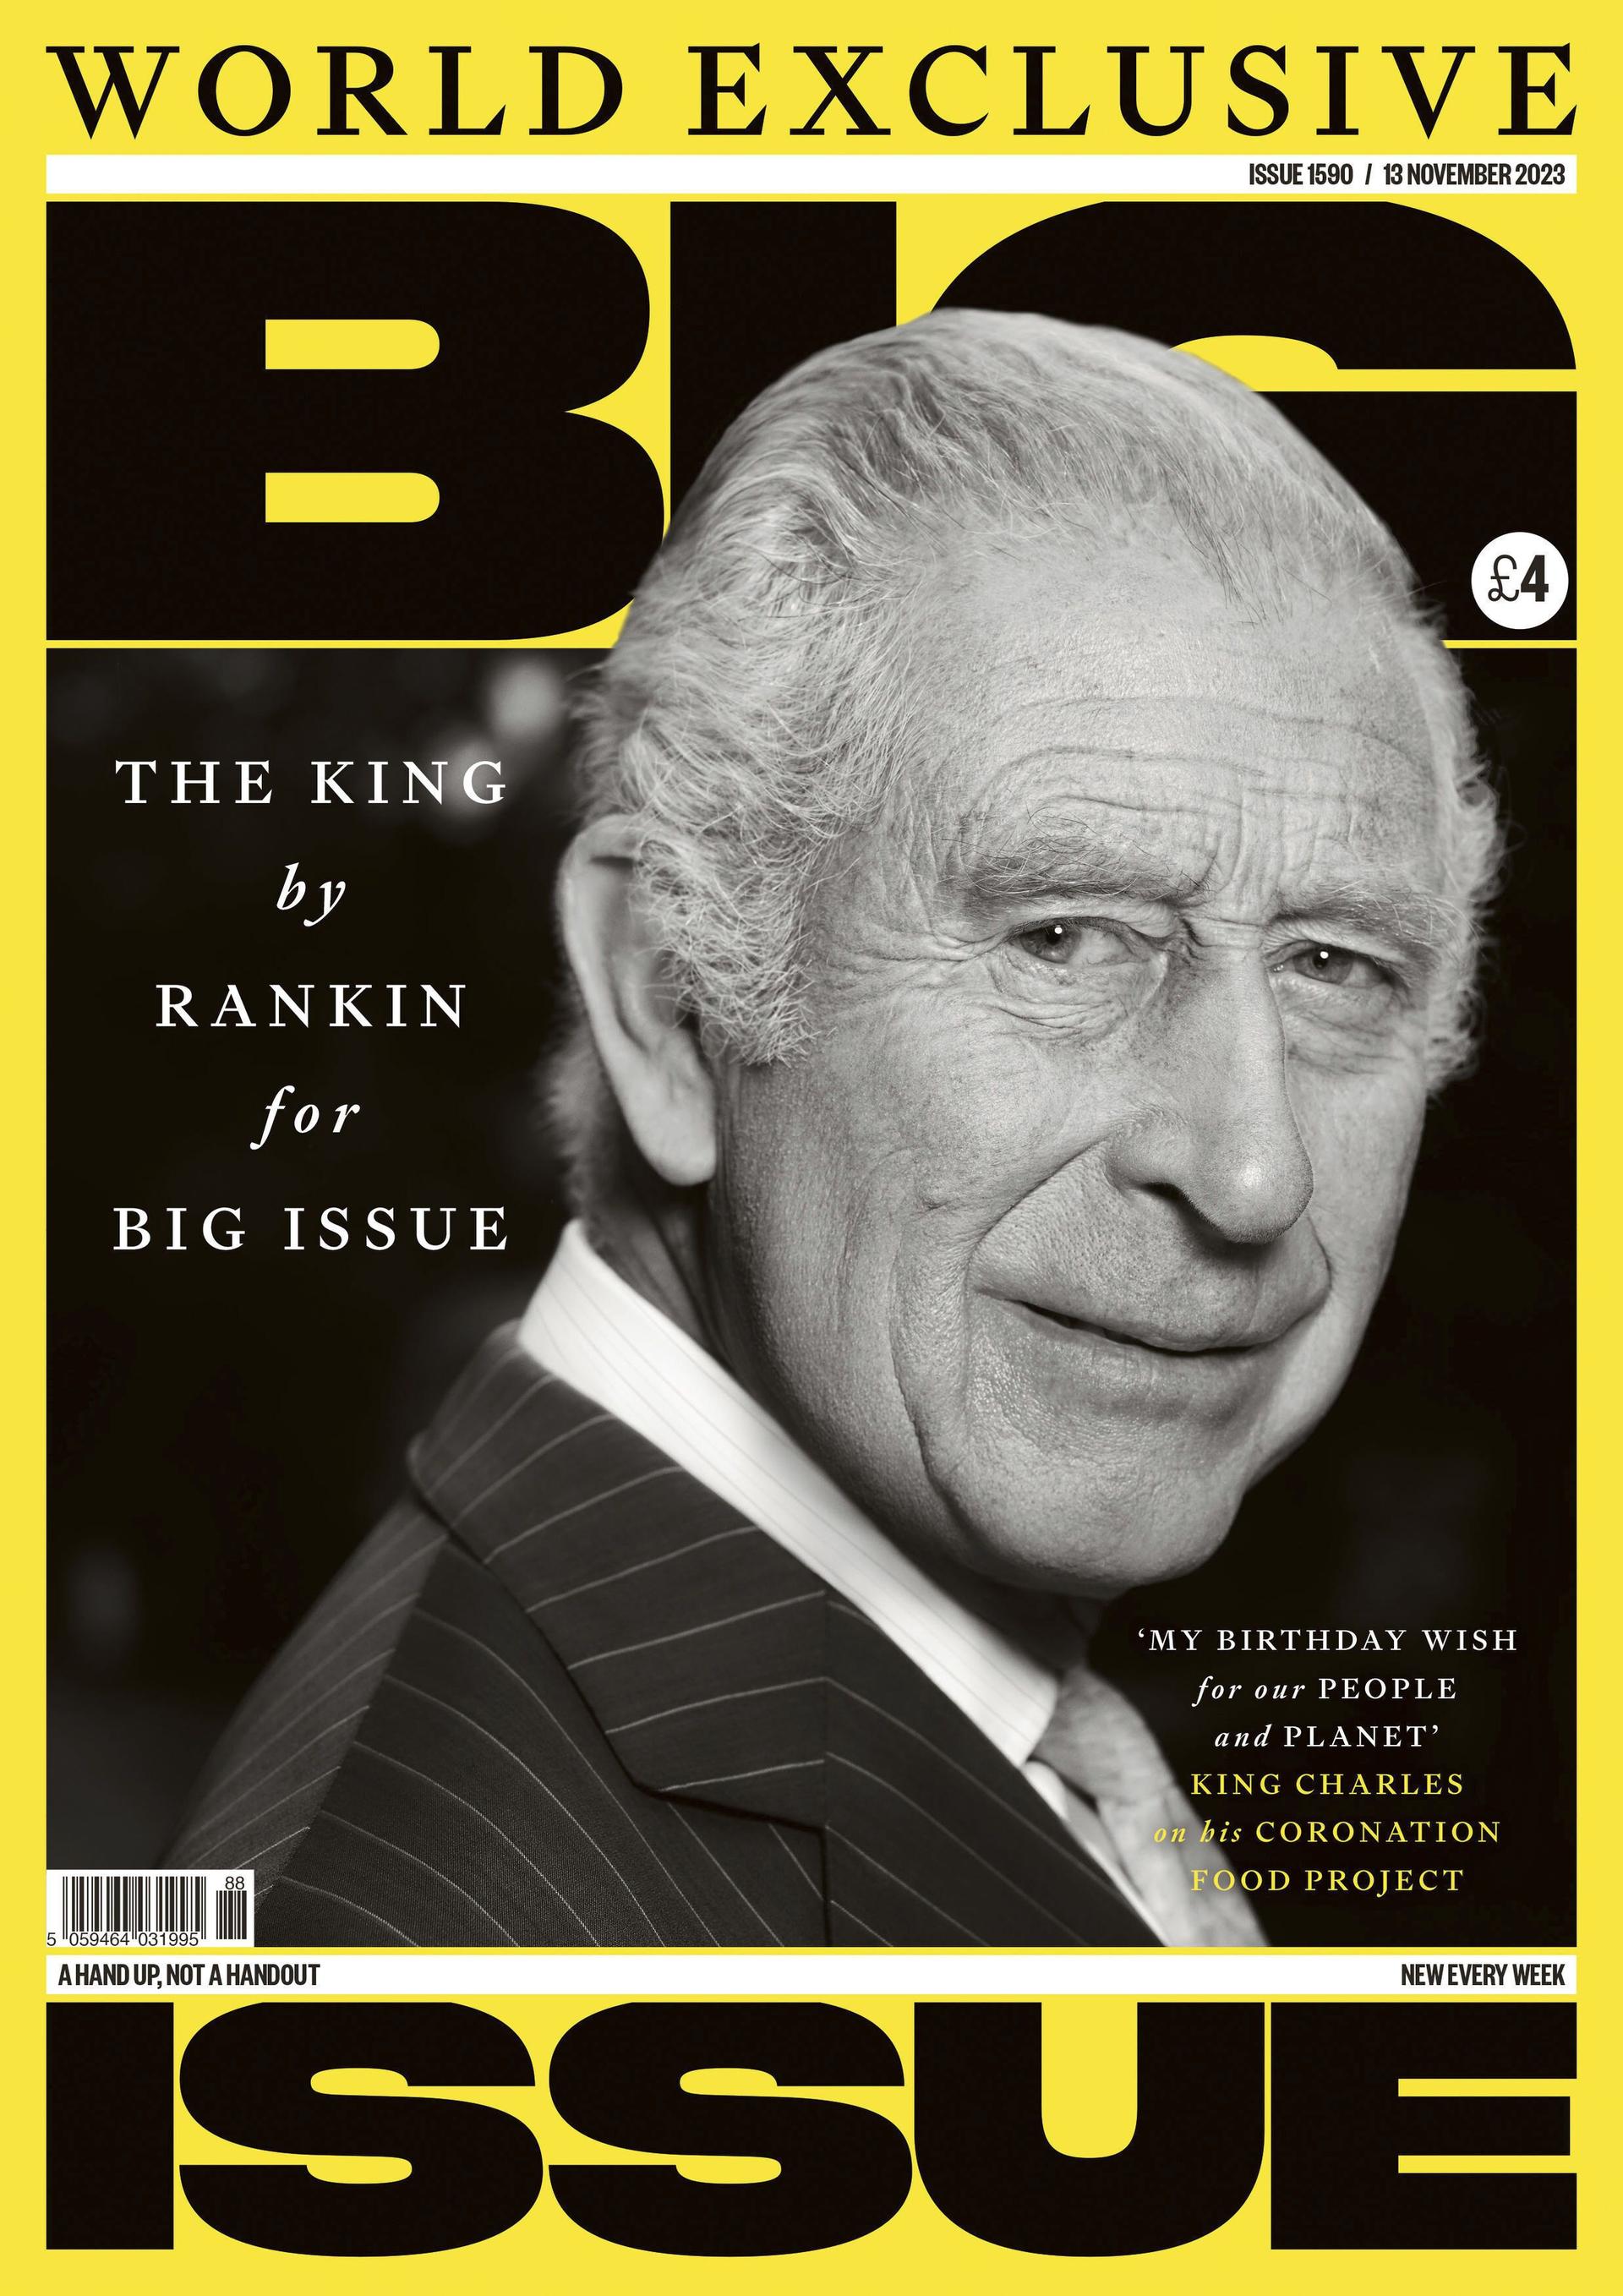 The latest cover of The Big Issue featuring a portrait of King Charles III was taken by celebrated British photographer Rankin to mark the launch of The Coronation Food Project.